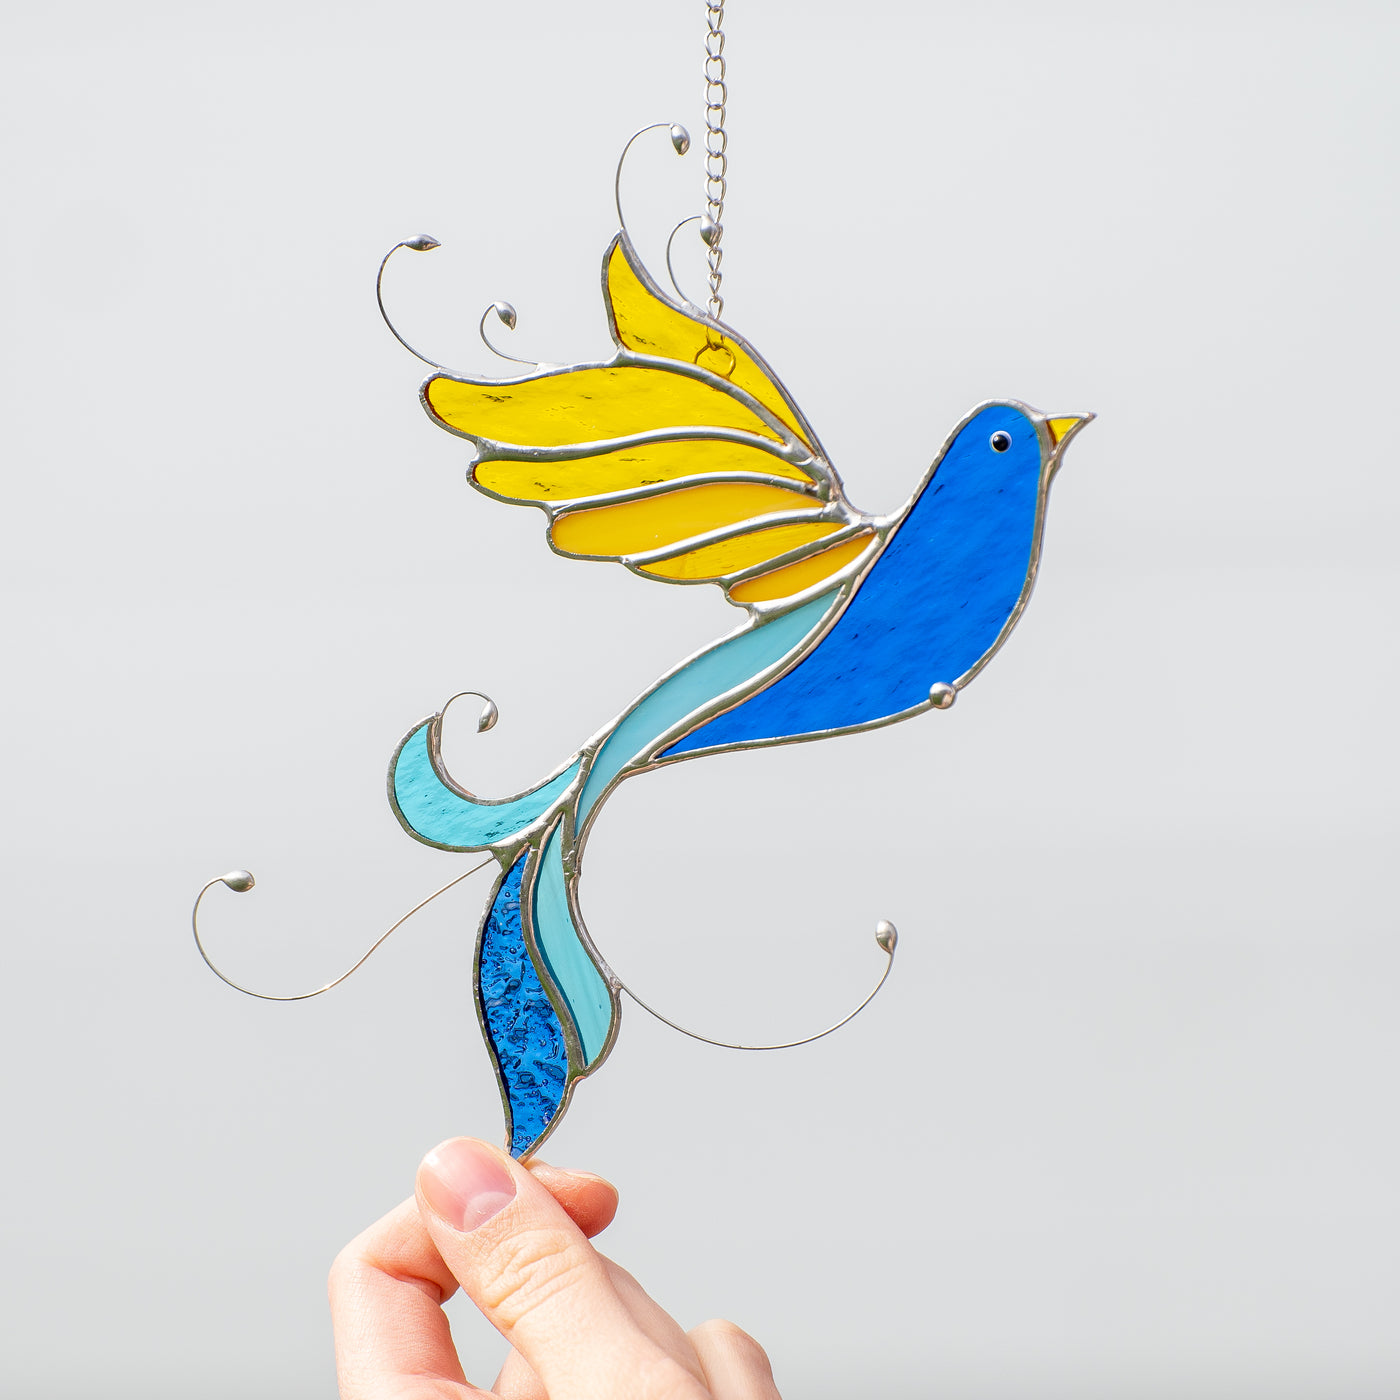 Stained glass bird of blue and yellow colors sucnatcher